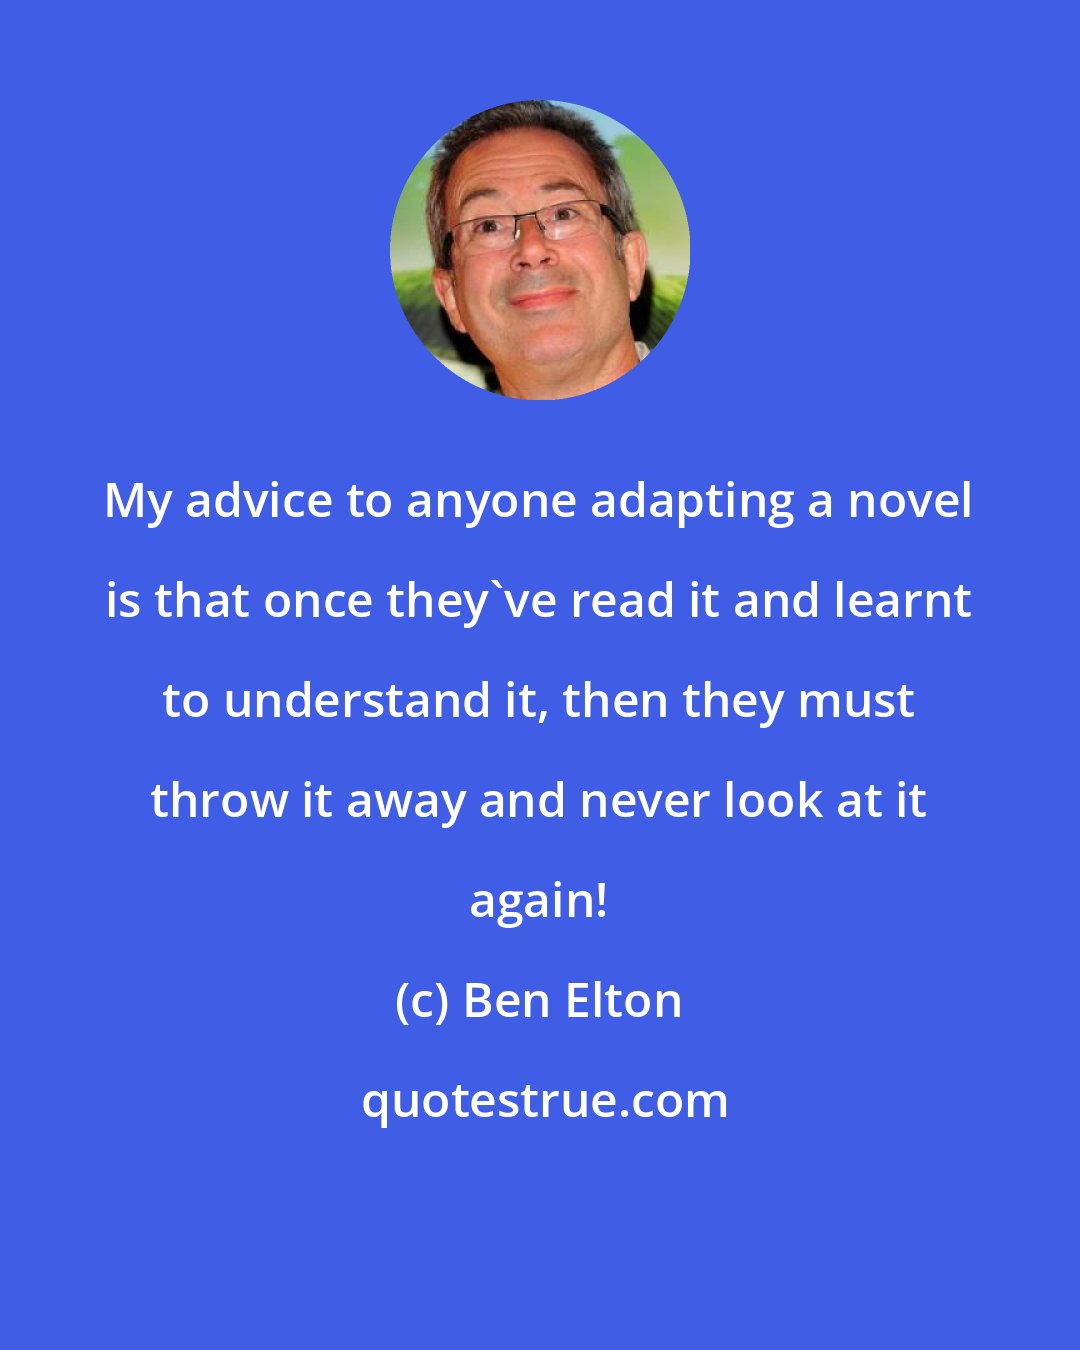 Ben Elton: My advice to anyone adapting a novel is that once they've read it and learnt to understand it, then they must throw it away and never look at it again!